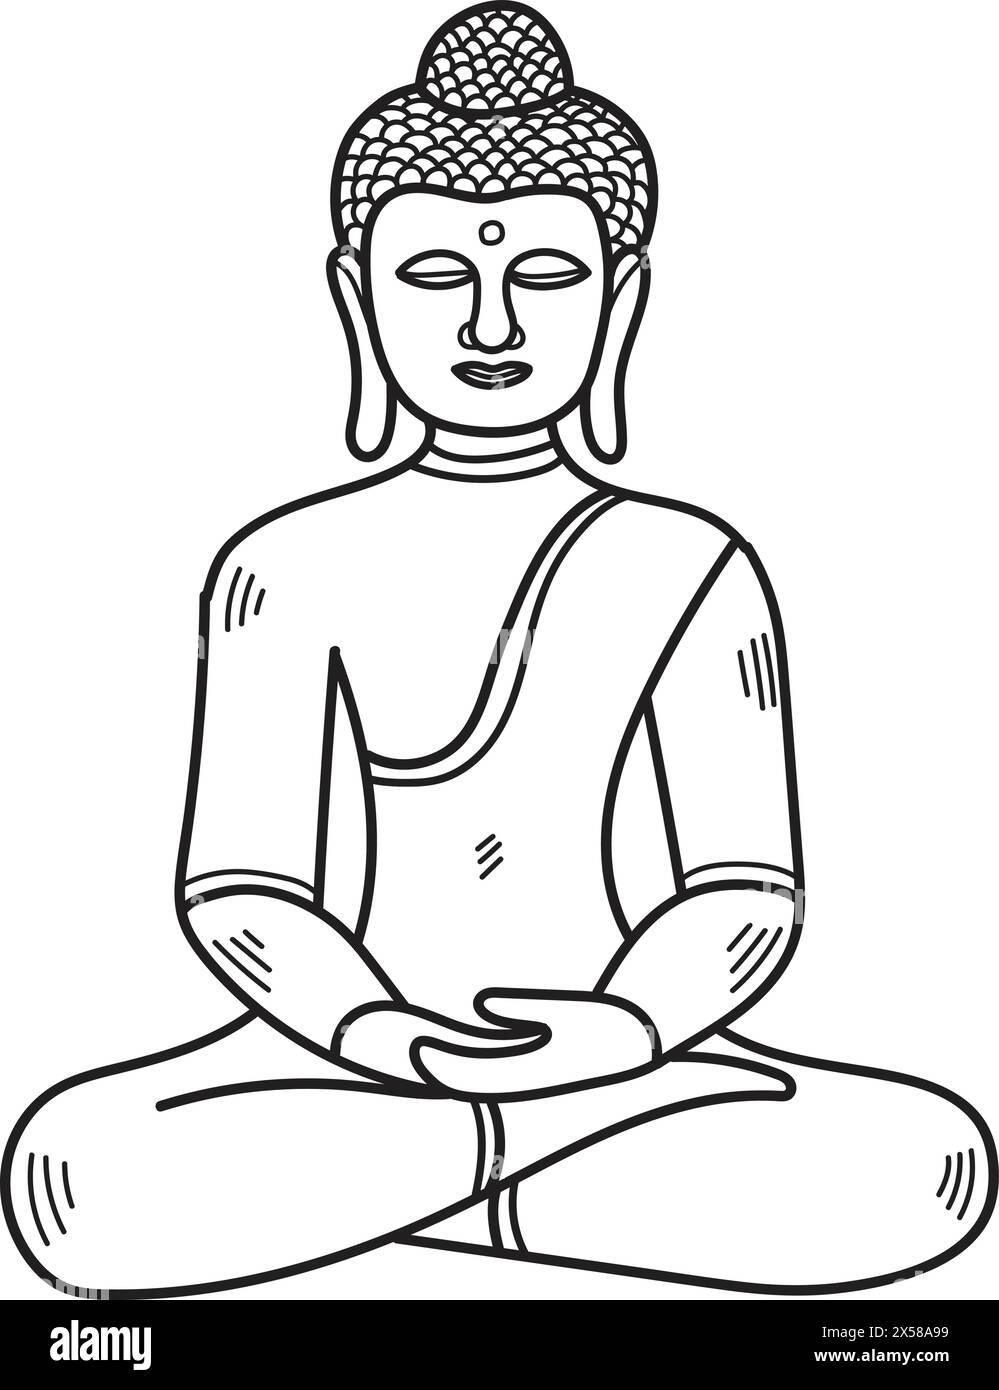 A drawing of a Buddha with a serene expression . The drawing is in black and white and is of a Buddhist figure Stock Vector